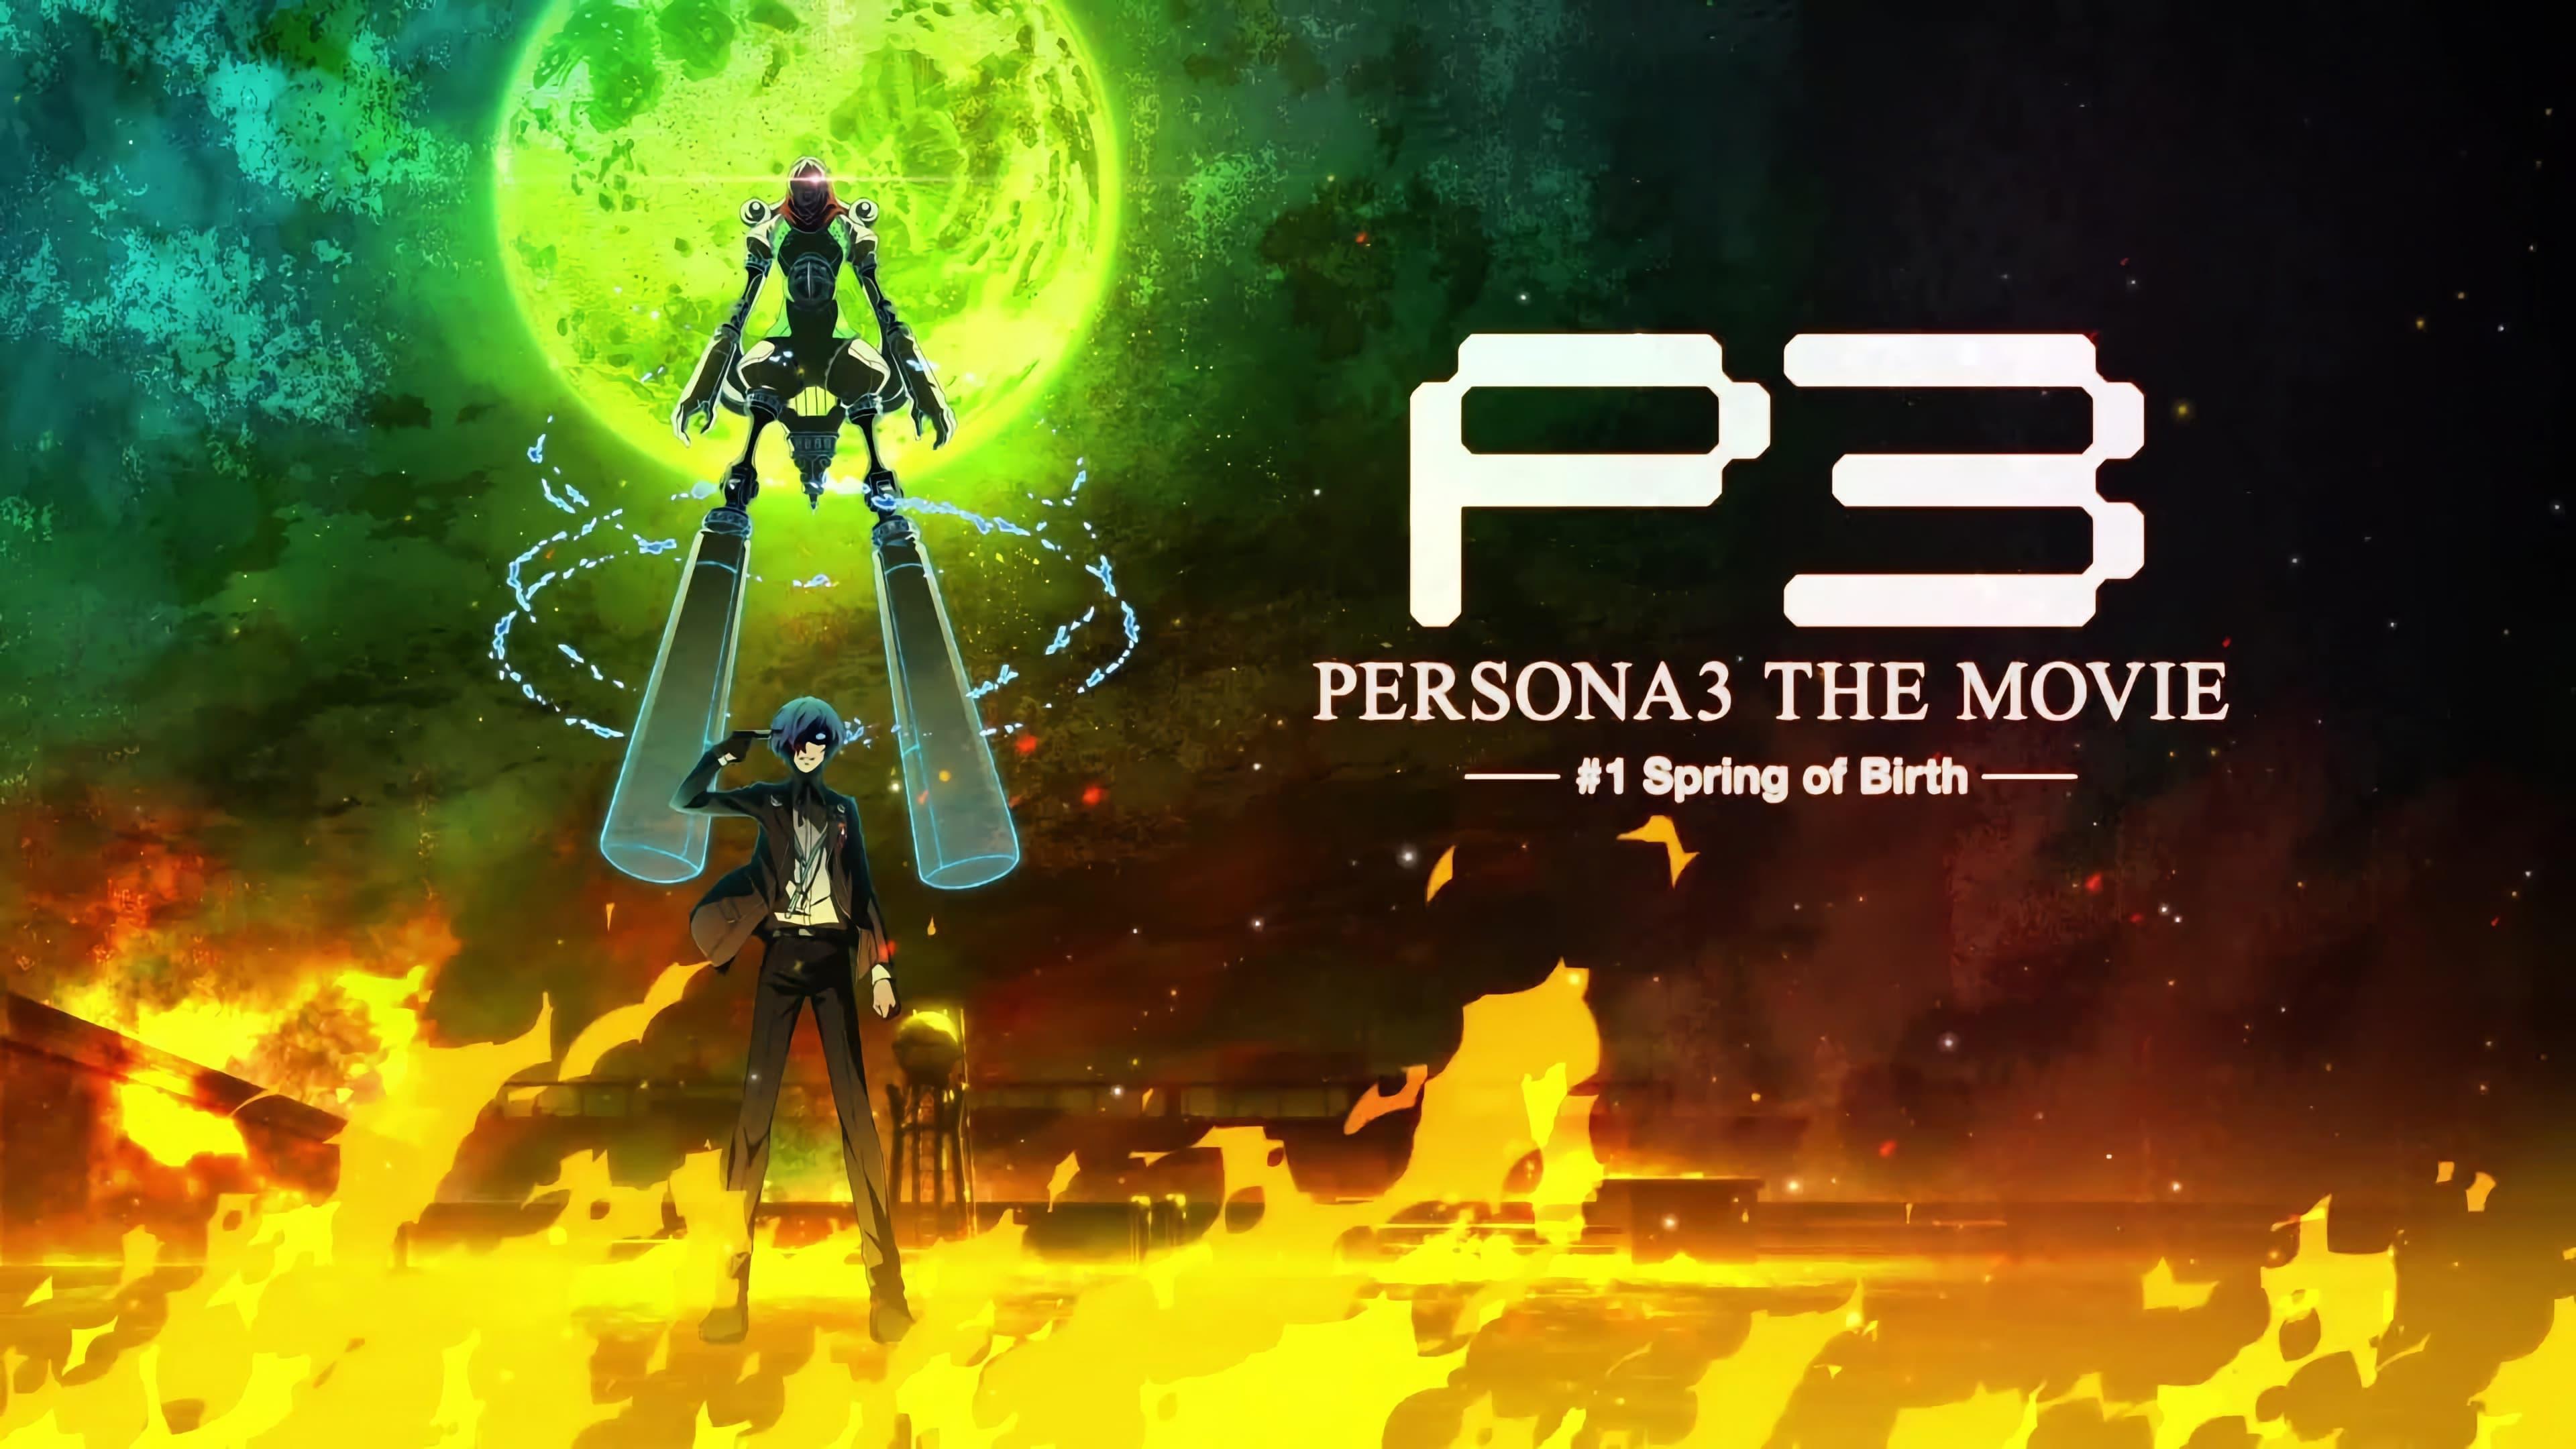 PERSONA3 THE MOVIE #1 Spring of Birth backdrop